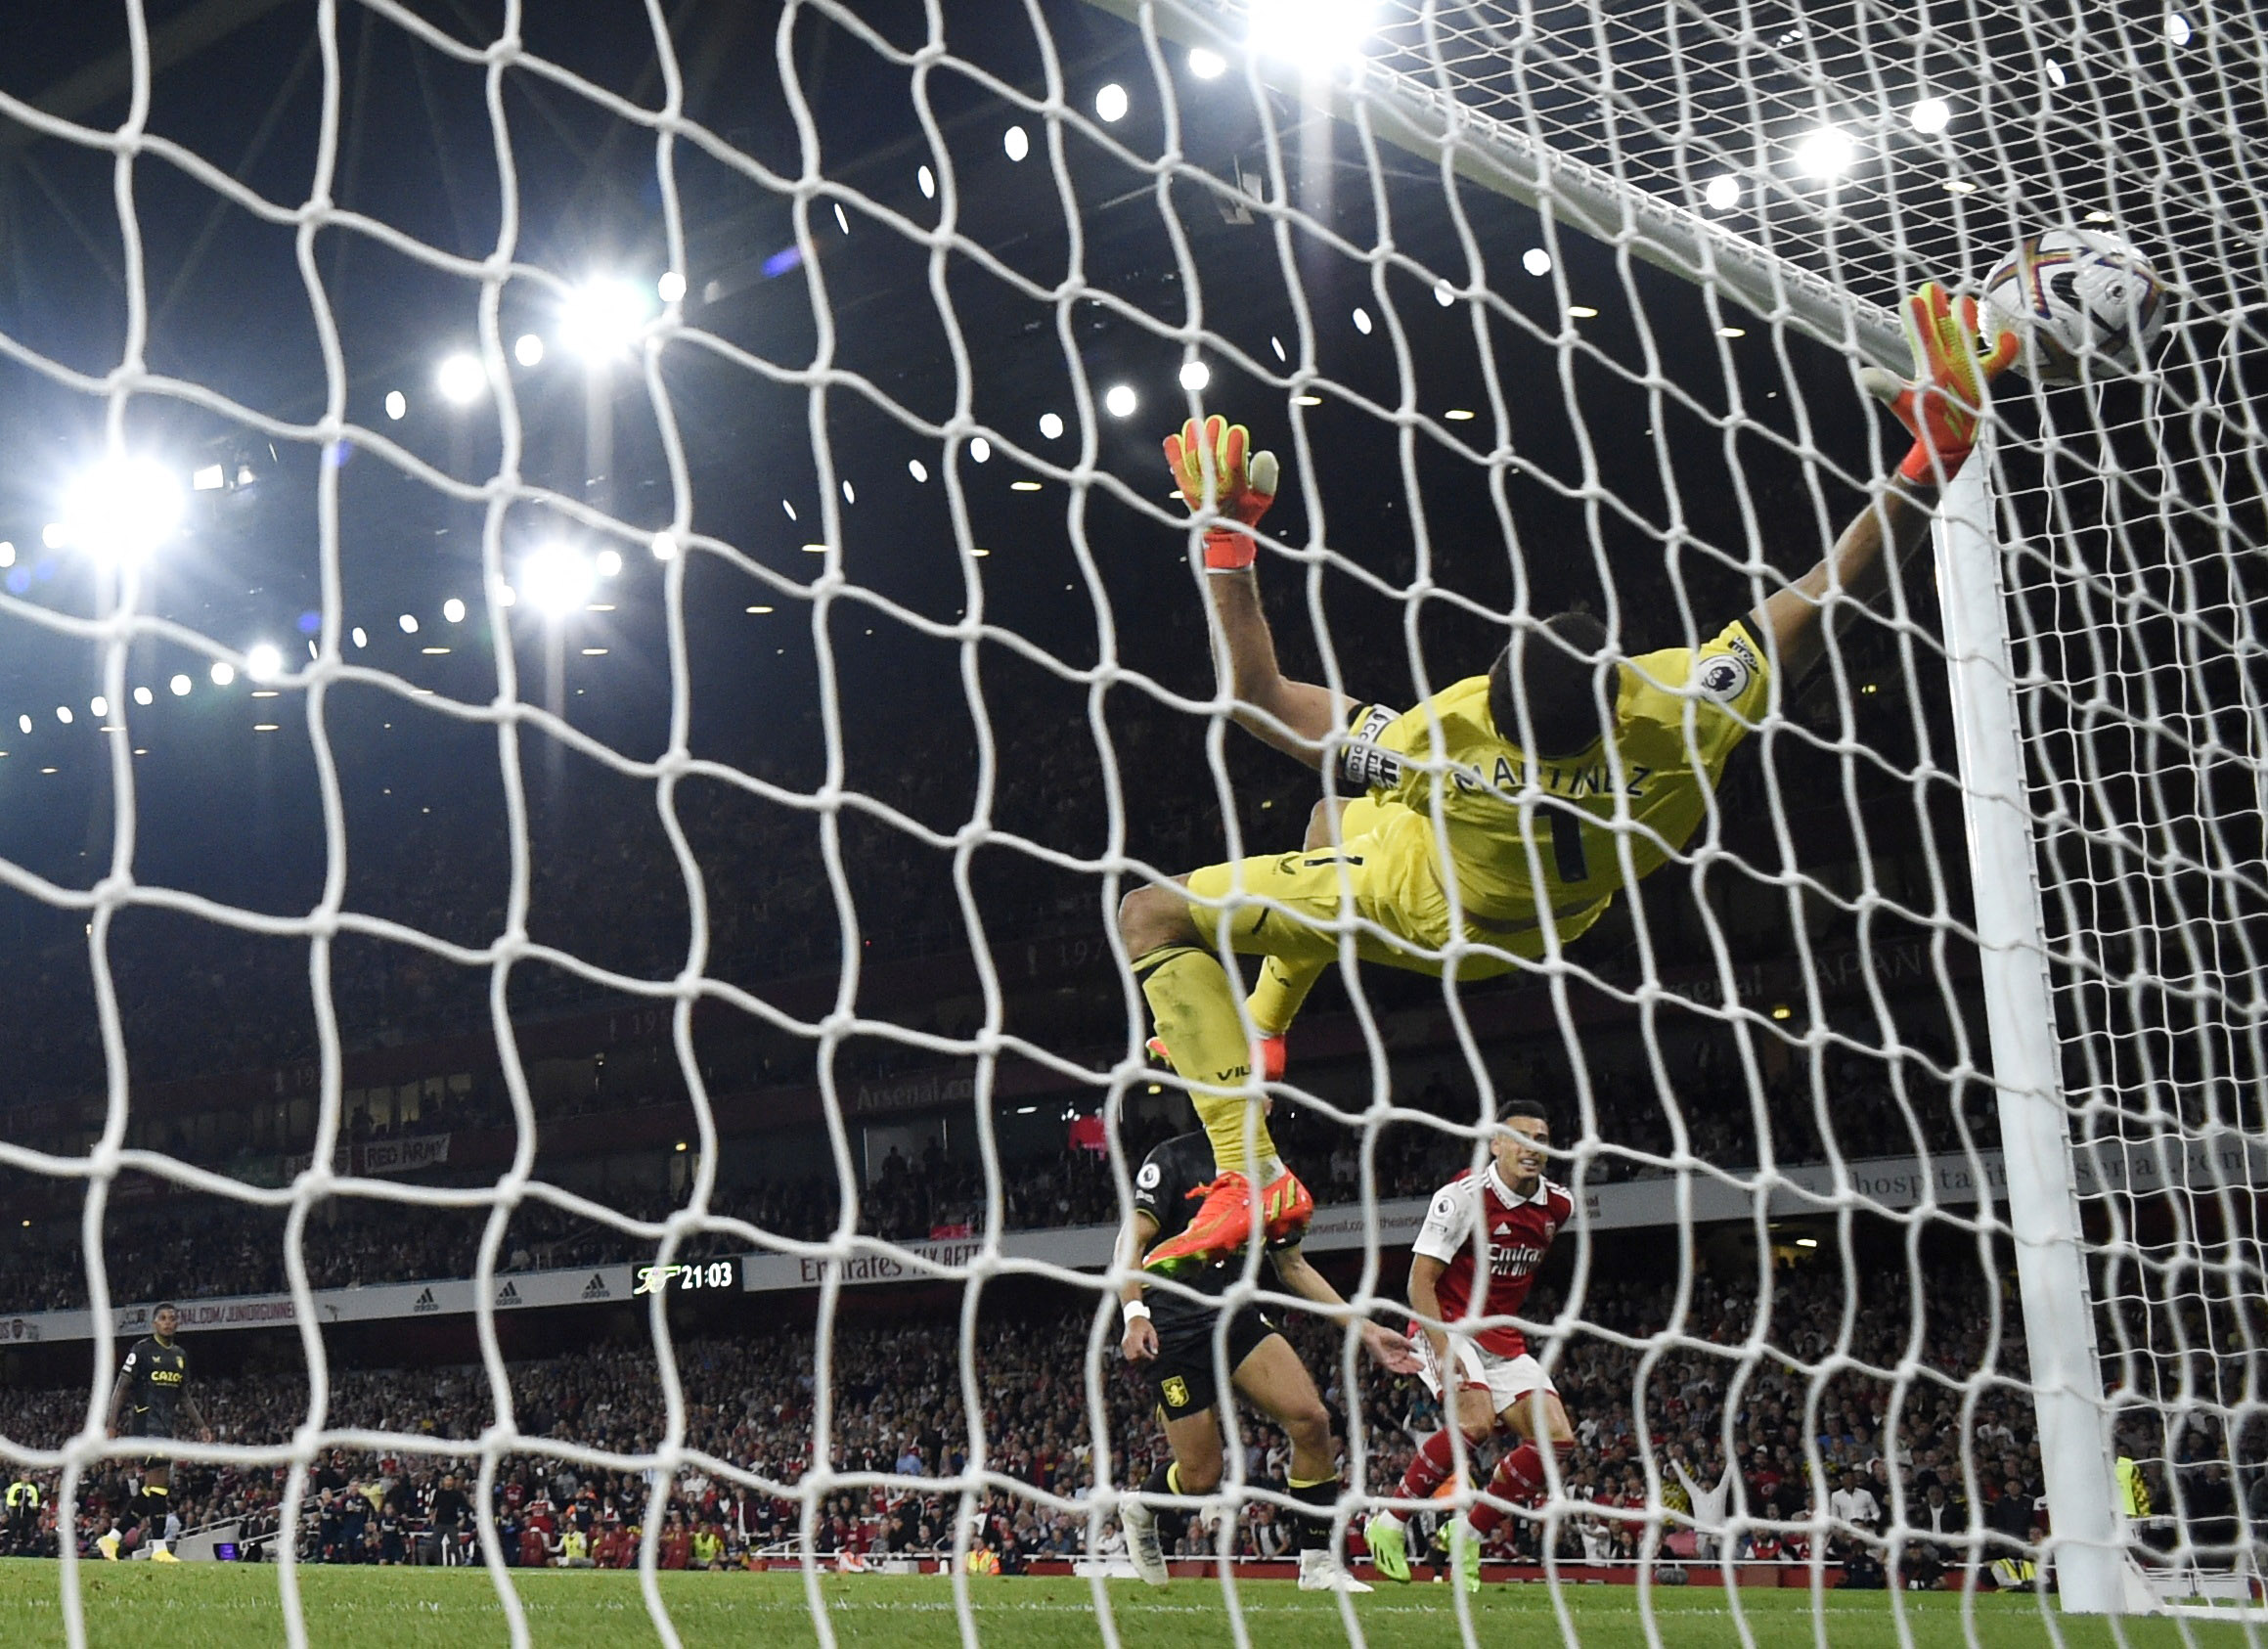 On Arsenal's second goal, Martinez was unable to knock out Martinelli's high shot